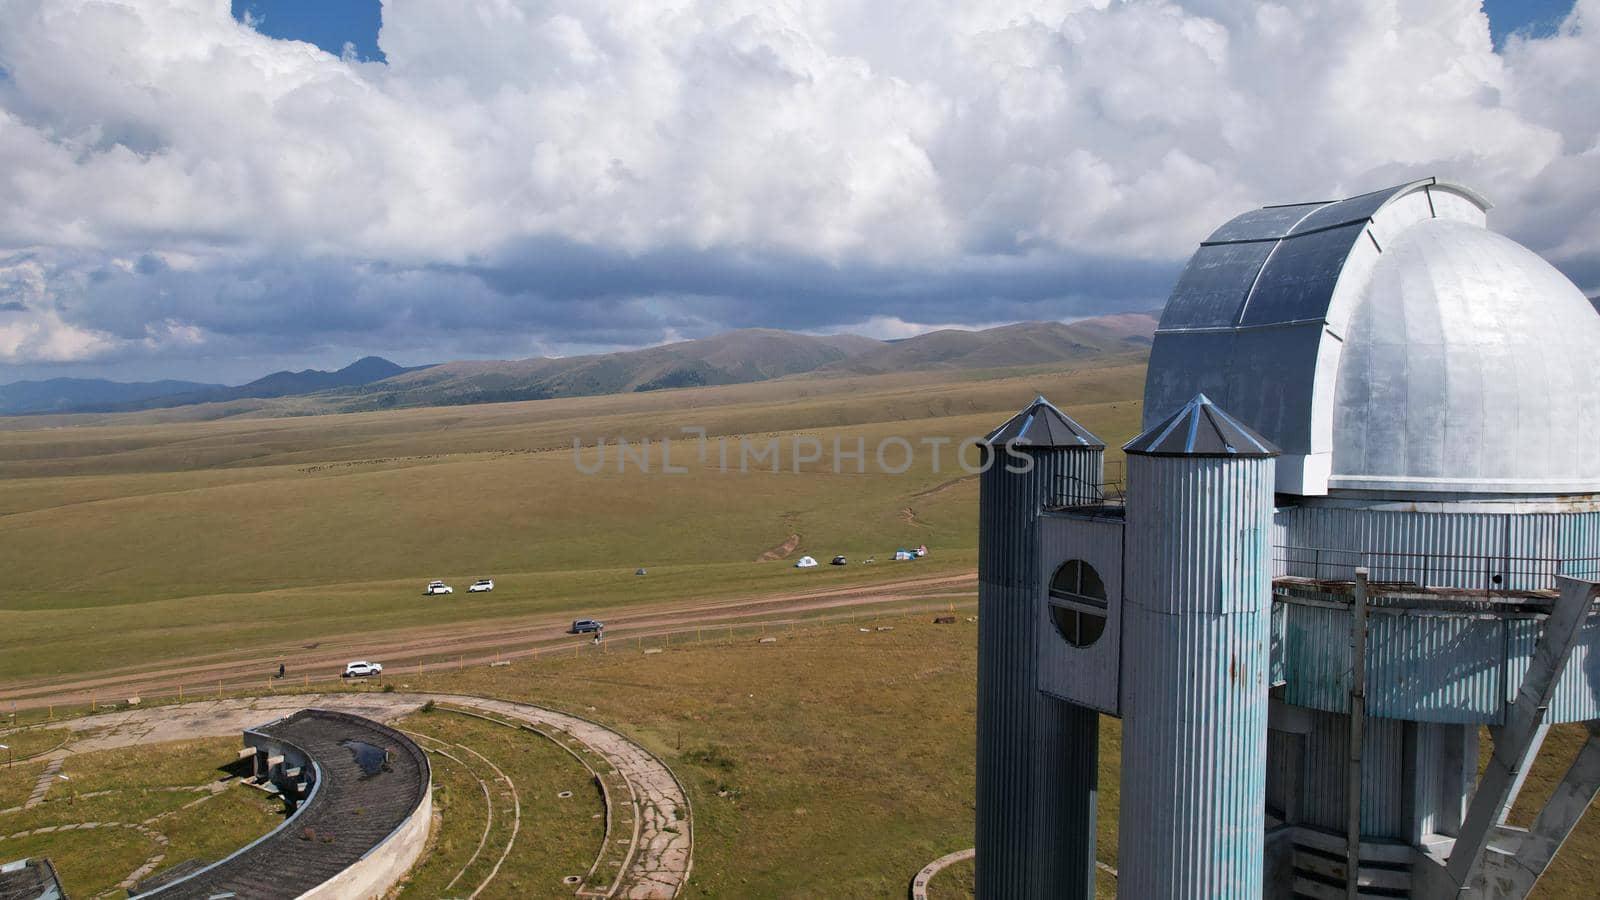 The Assy-Turgen Observatory is high in the mountains. There is a tent camp next to the observatory. Large cumulus clouds in a blue sky. Yellow-green hills, forest in places. Top view from a drone